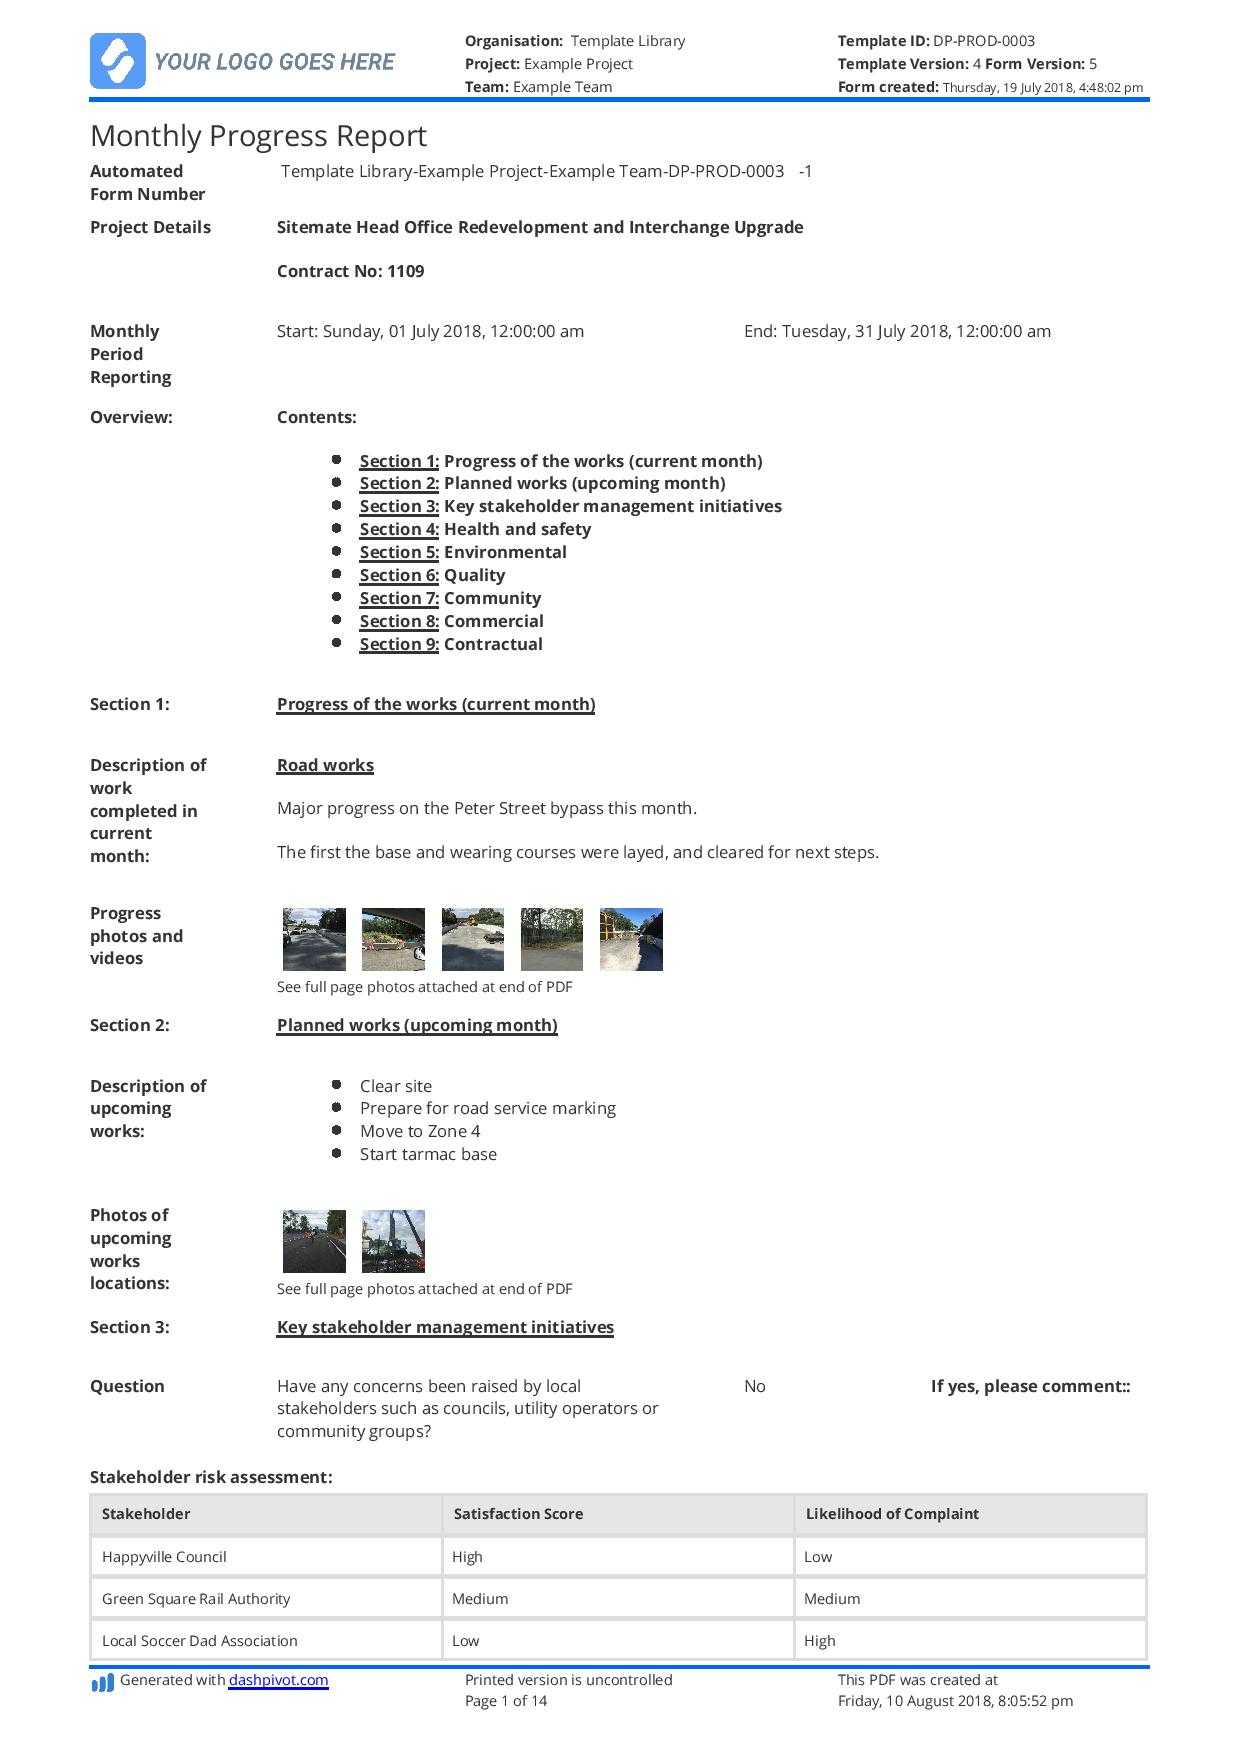 Monthly Construction Progress Report Template: Use This For Progress Report Template For Construction Project